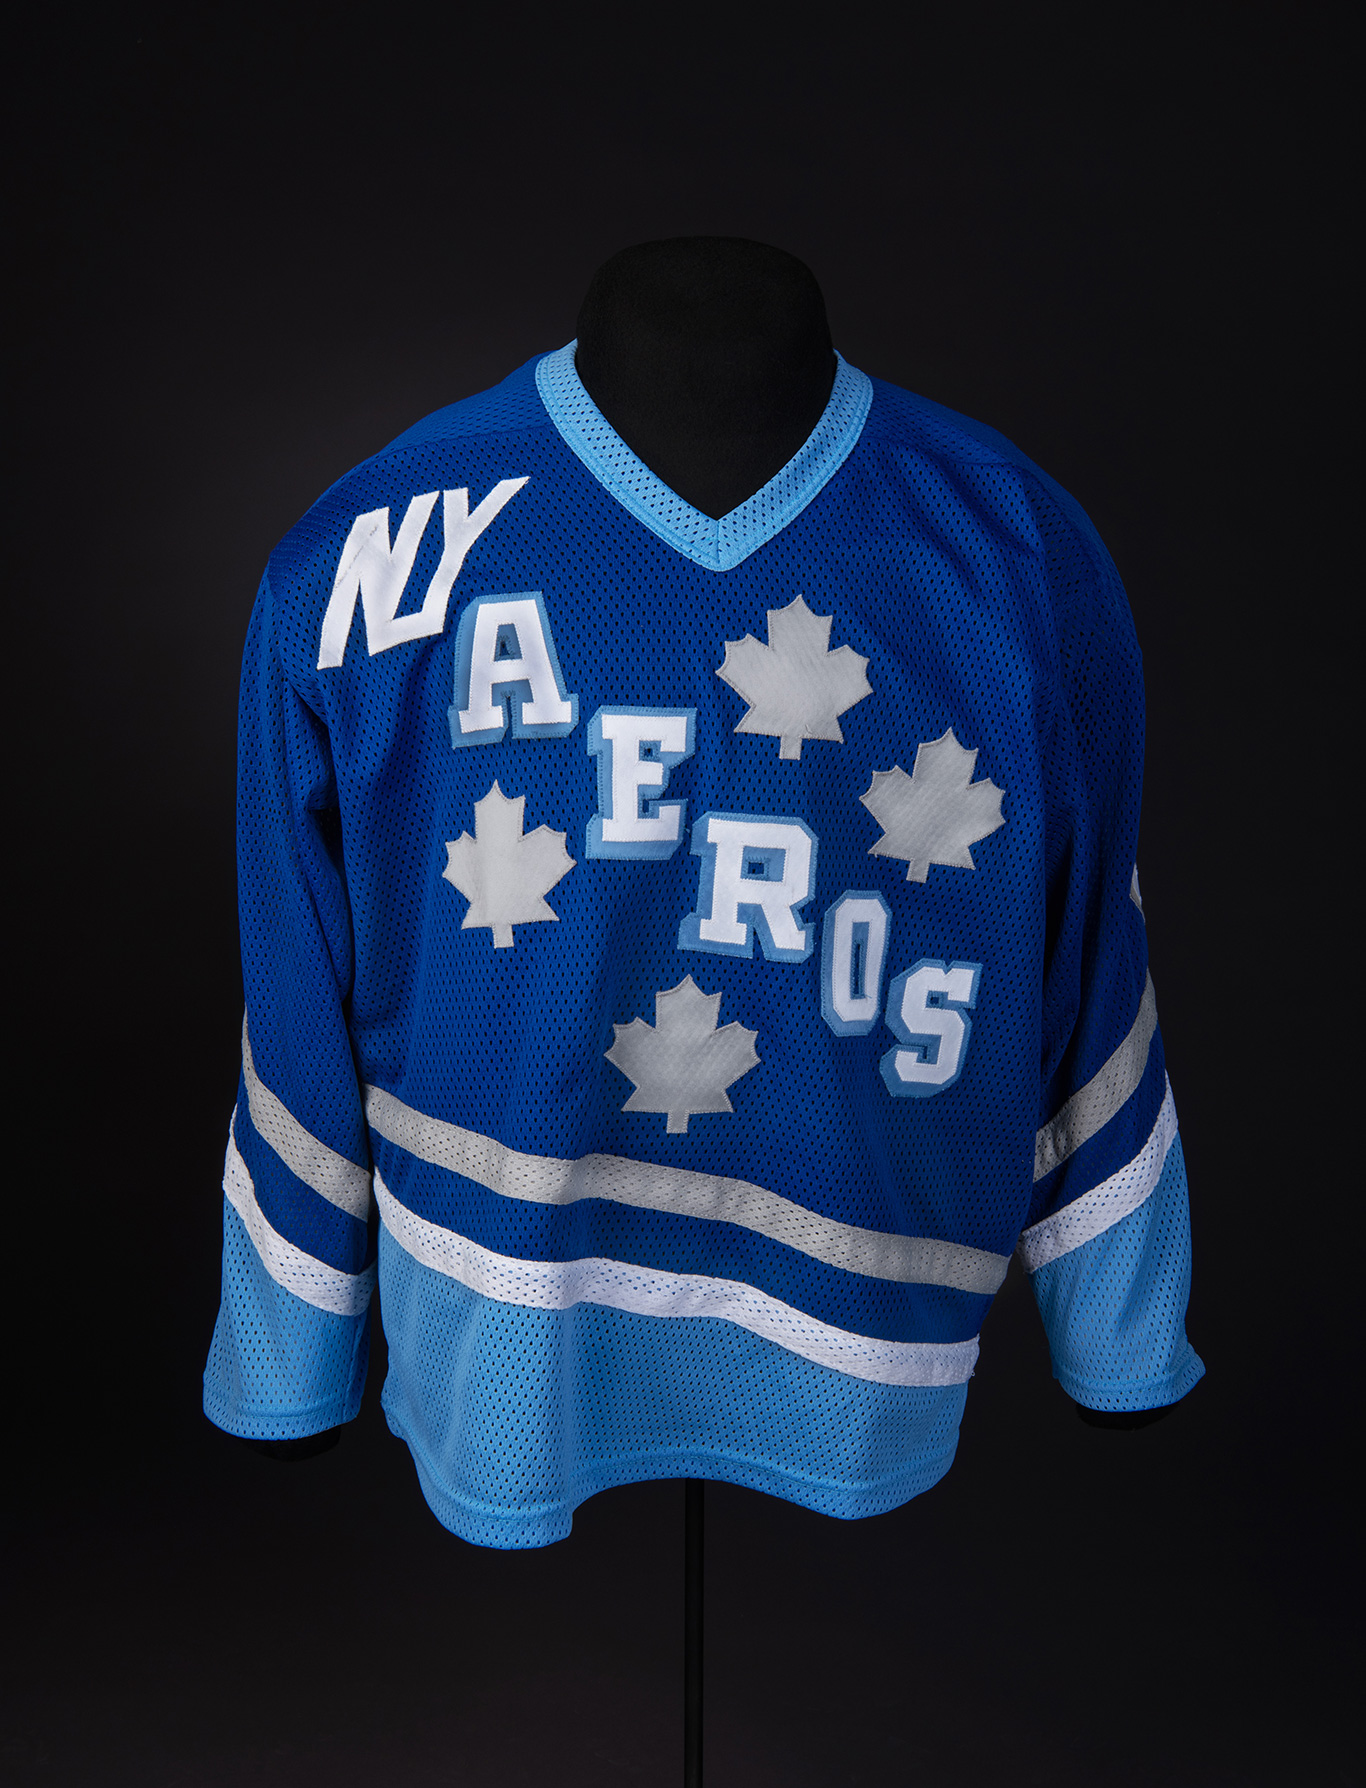 : Maillot de hockey bleu avec l’inscription NY AEROS en lettres blanches et 4 feuilles d’érable blanches autour des lettres. Blue hockey jersey reads “NY AEROS” in white lettering with four white maple leaves around the lettering.